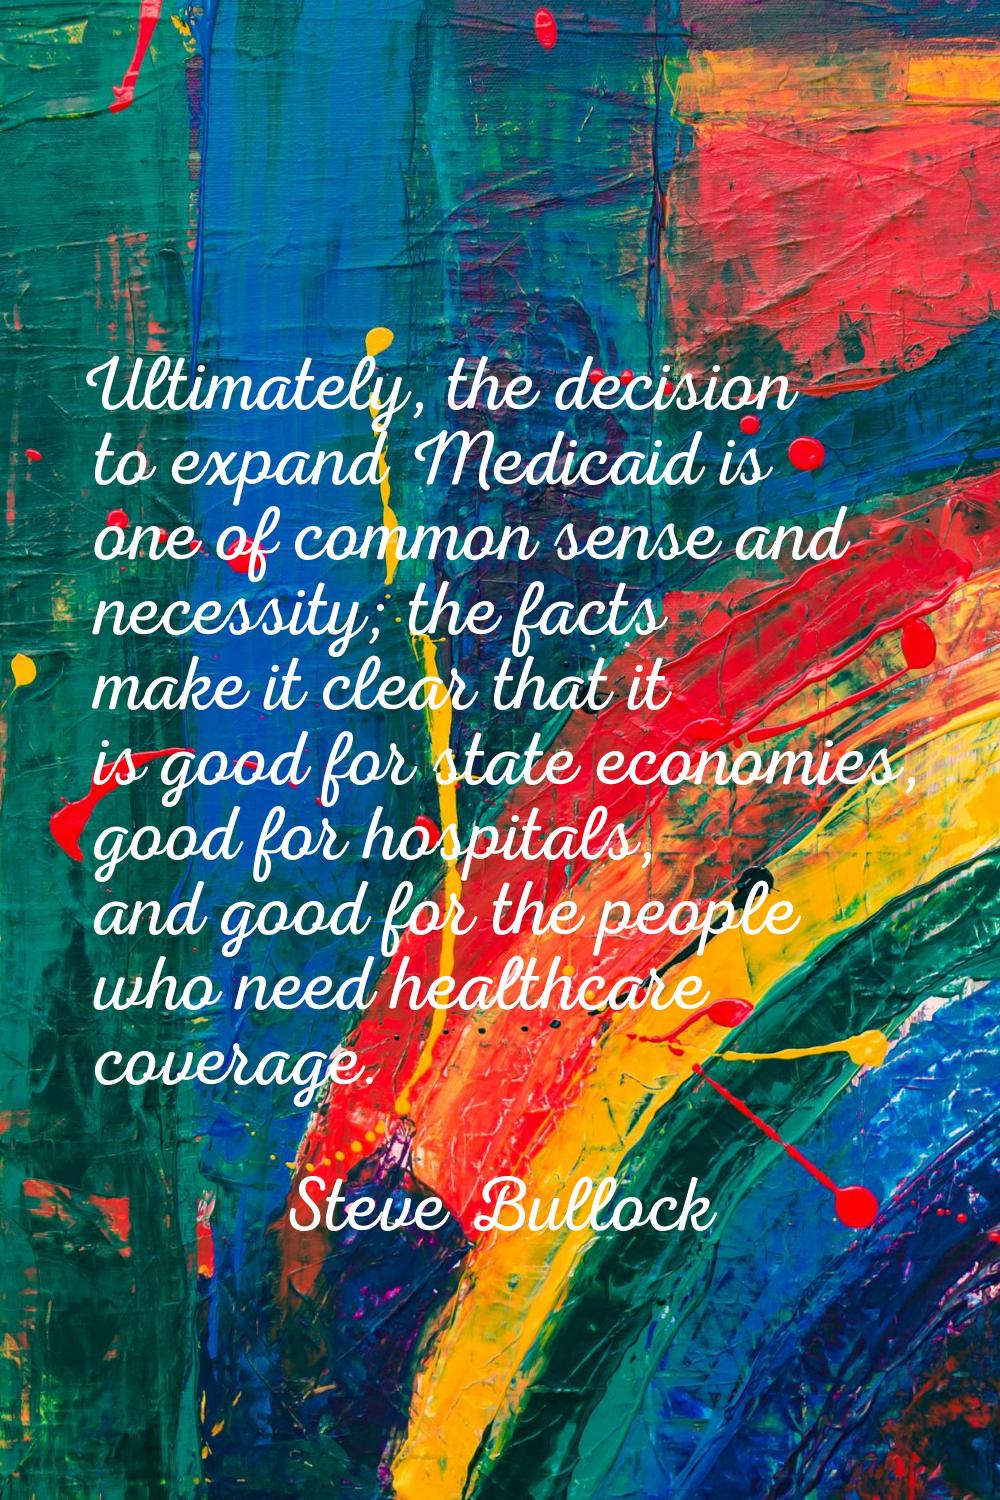 Ultimately, the decision to expand Medicaid is one of common sense and necessity; the facts make it